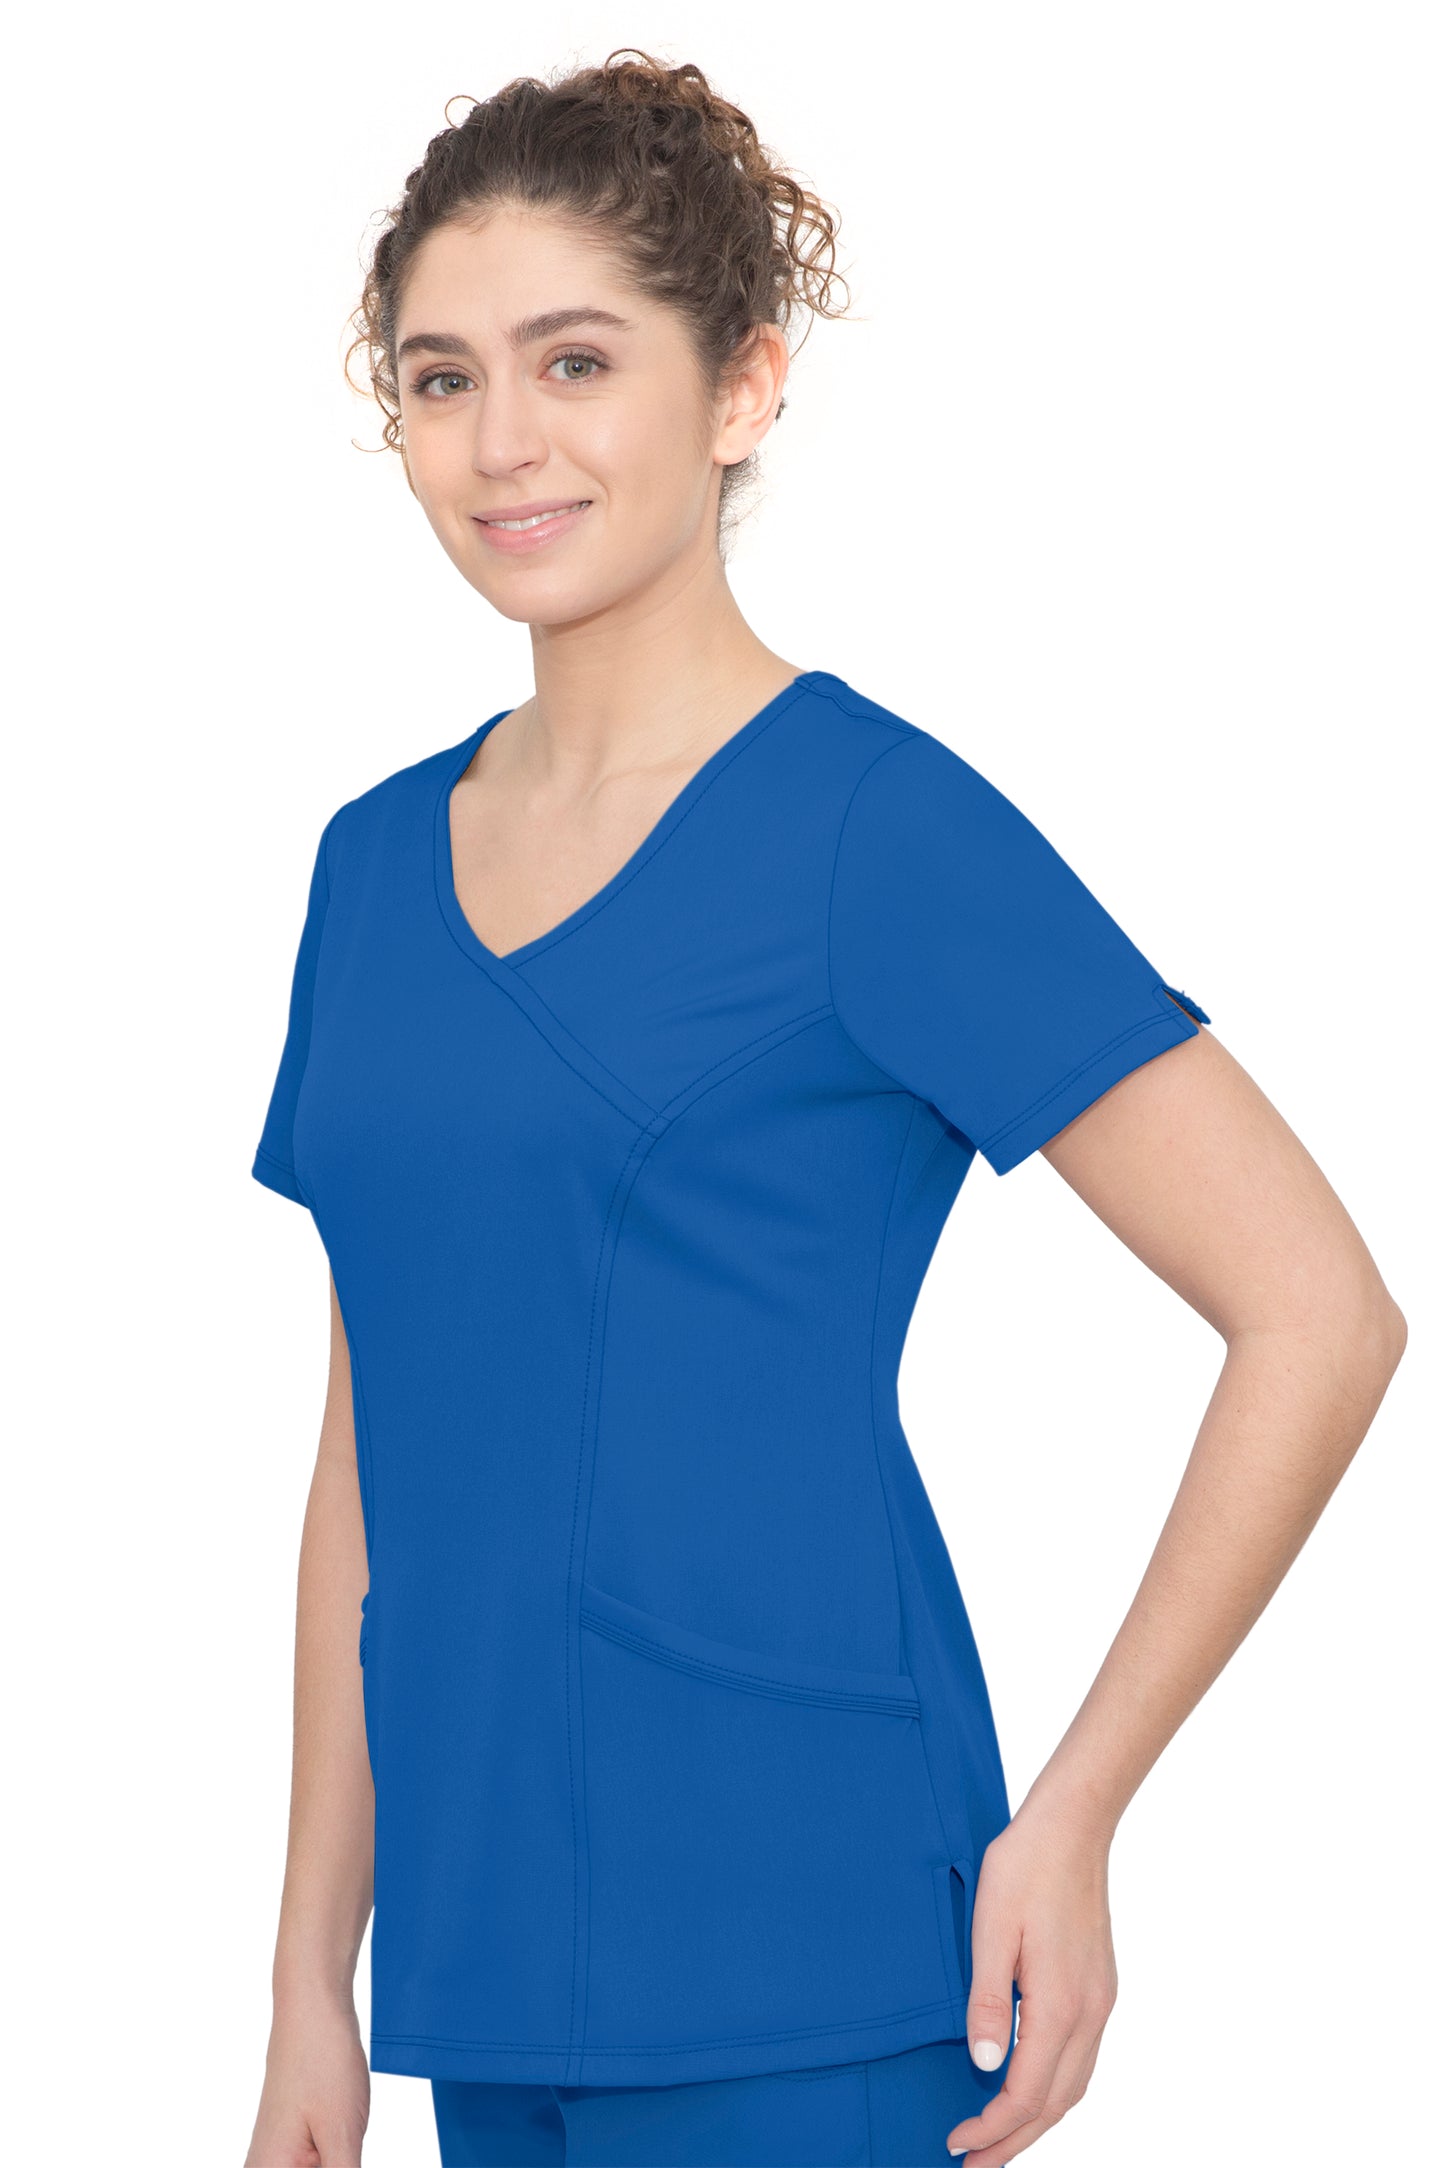 Healing Hands HH Works 2525 Madison Women's Top Royal